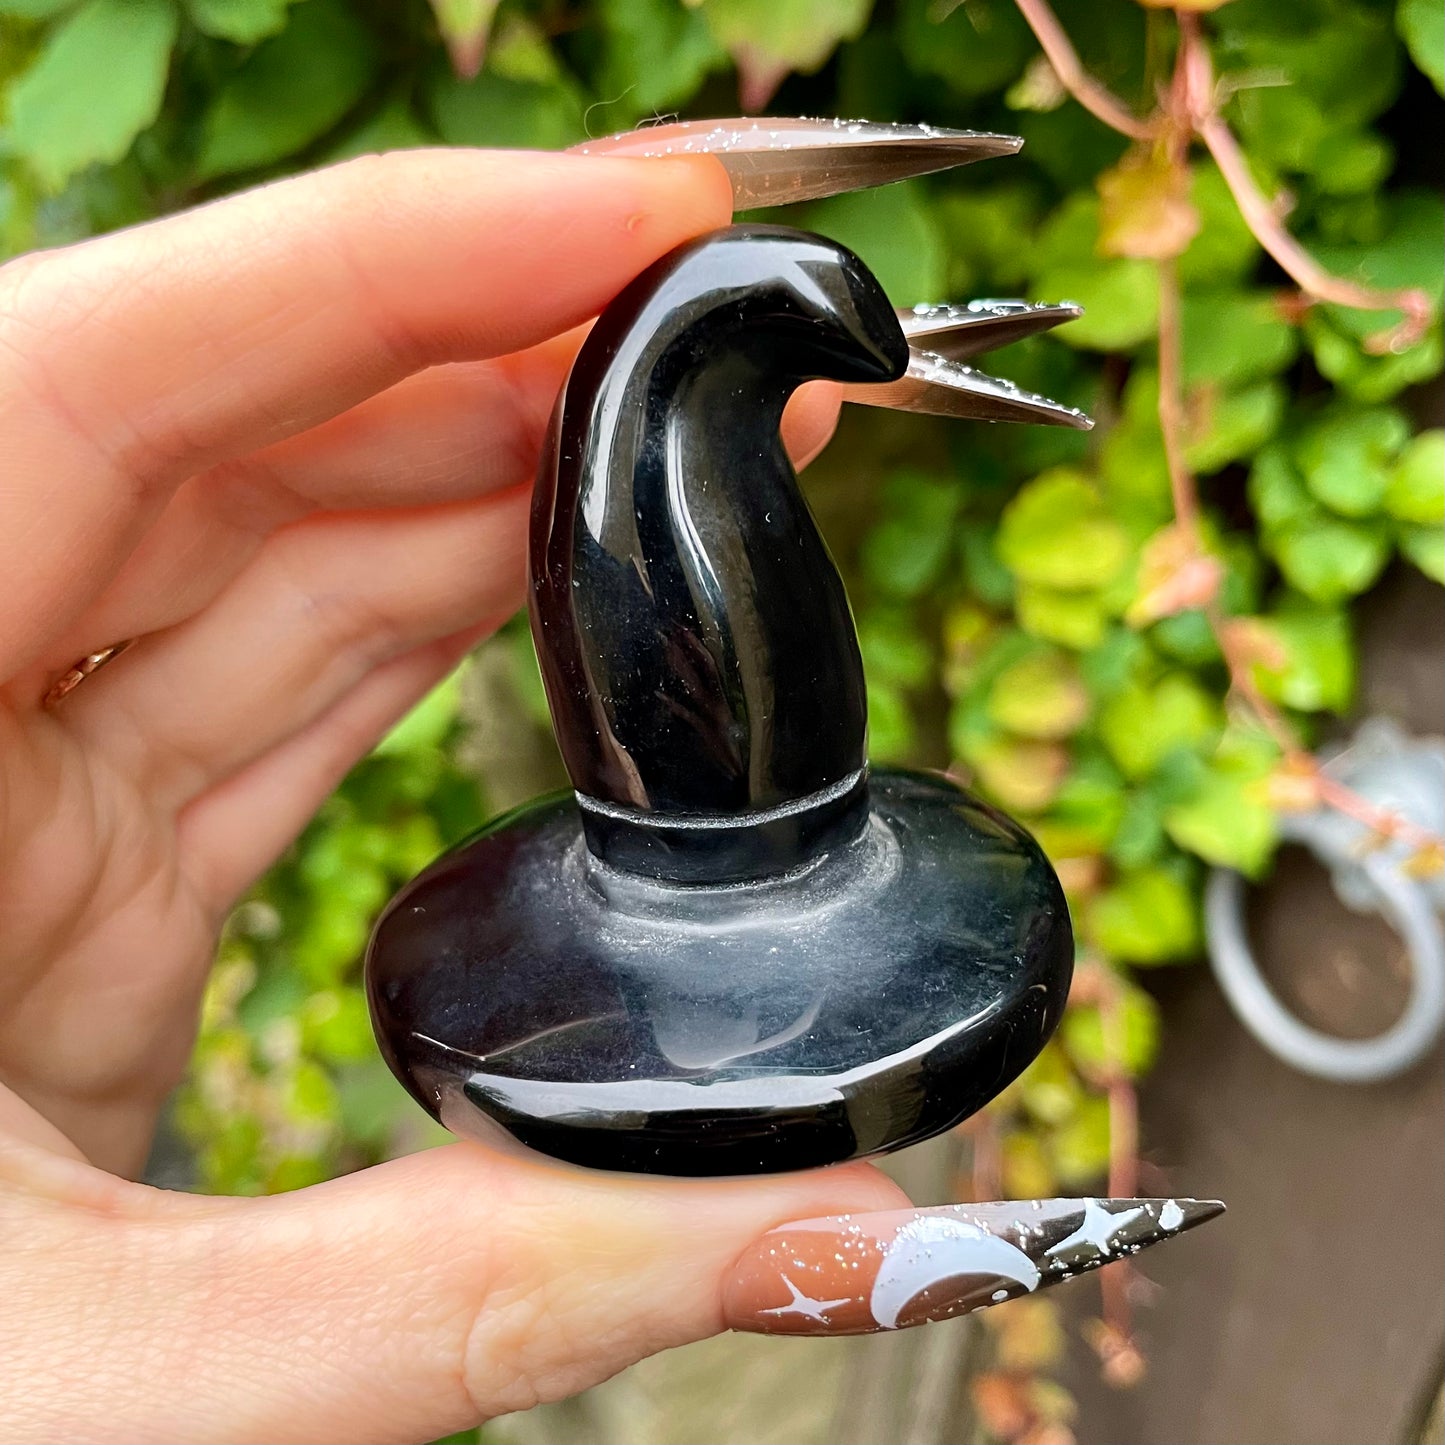 Black Obsidian Witches Hat 🧹🖤✨